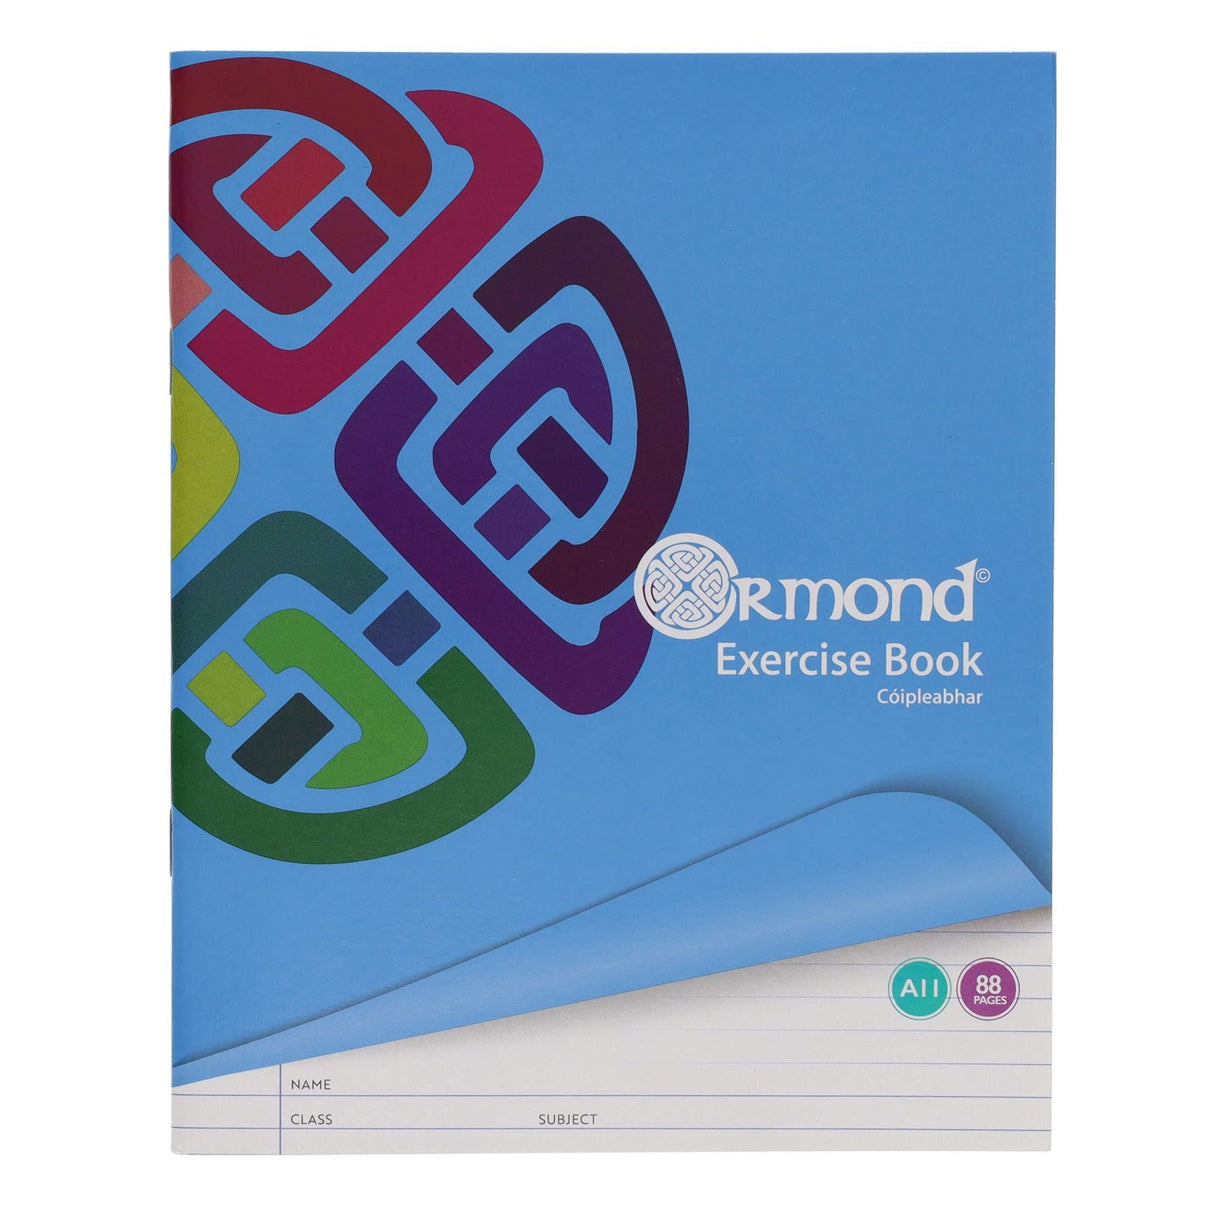 Ormond Multipack | A11 Exercise Book - Margin Ruled - 88 Pages - Pack of 10 | Stationery Shop UK